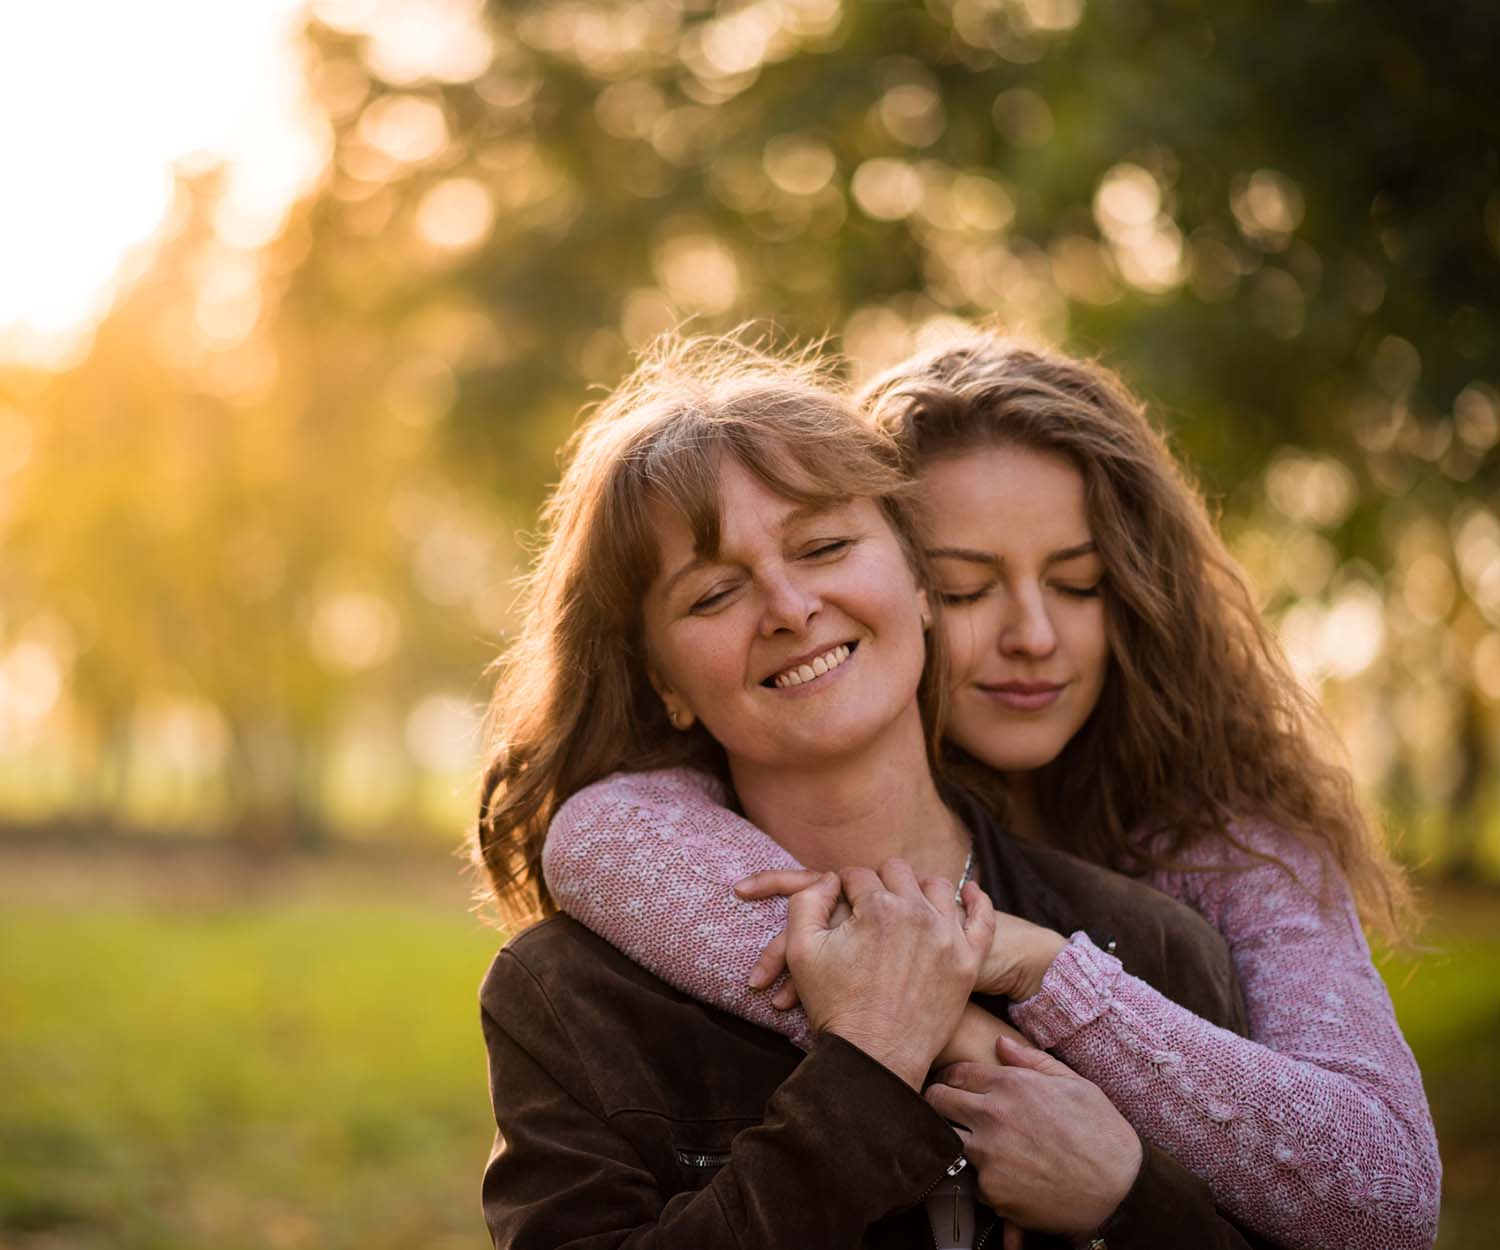 Losing your mother when you're a teenager